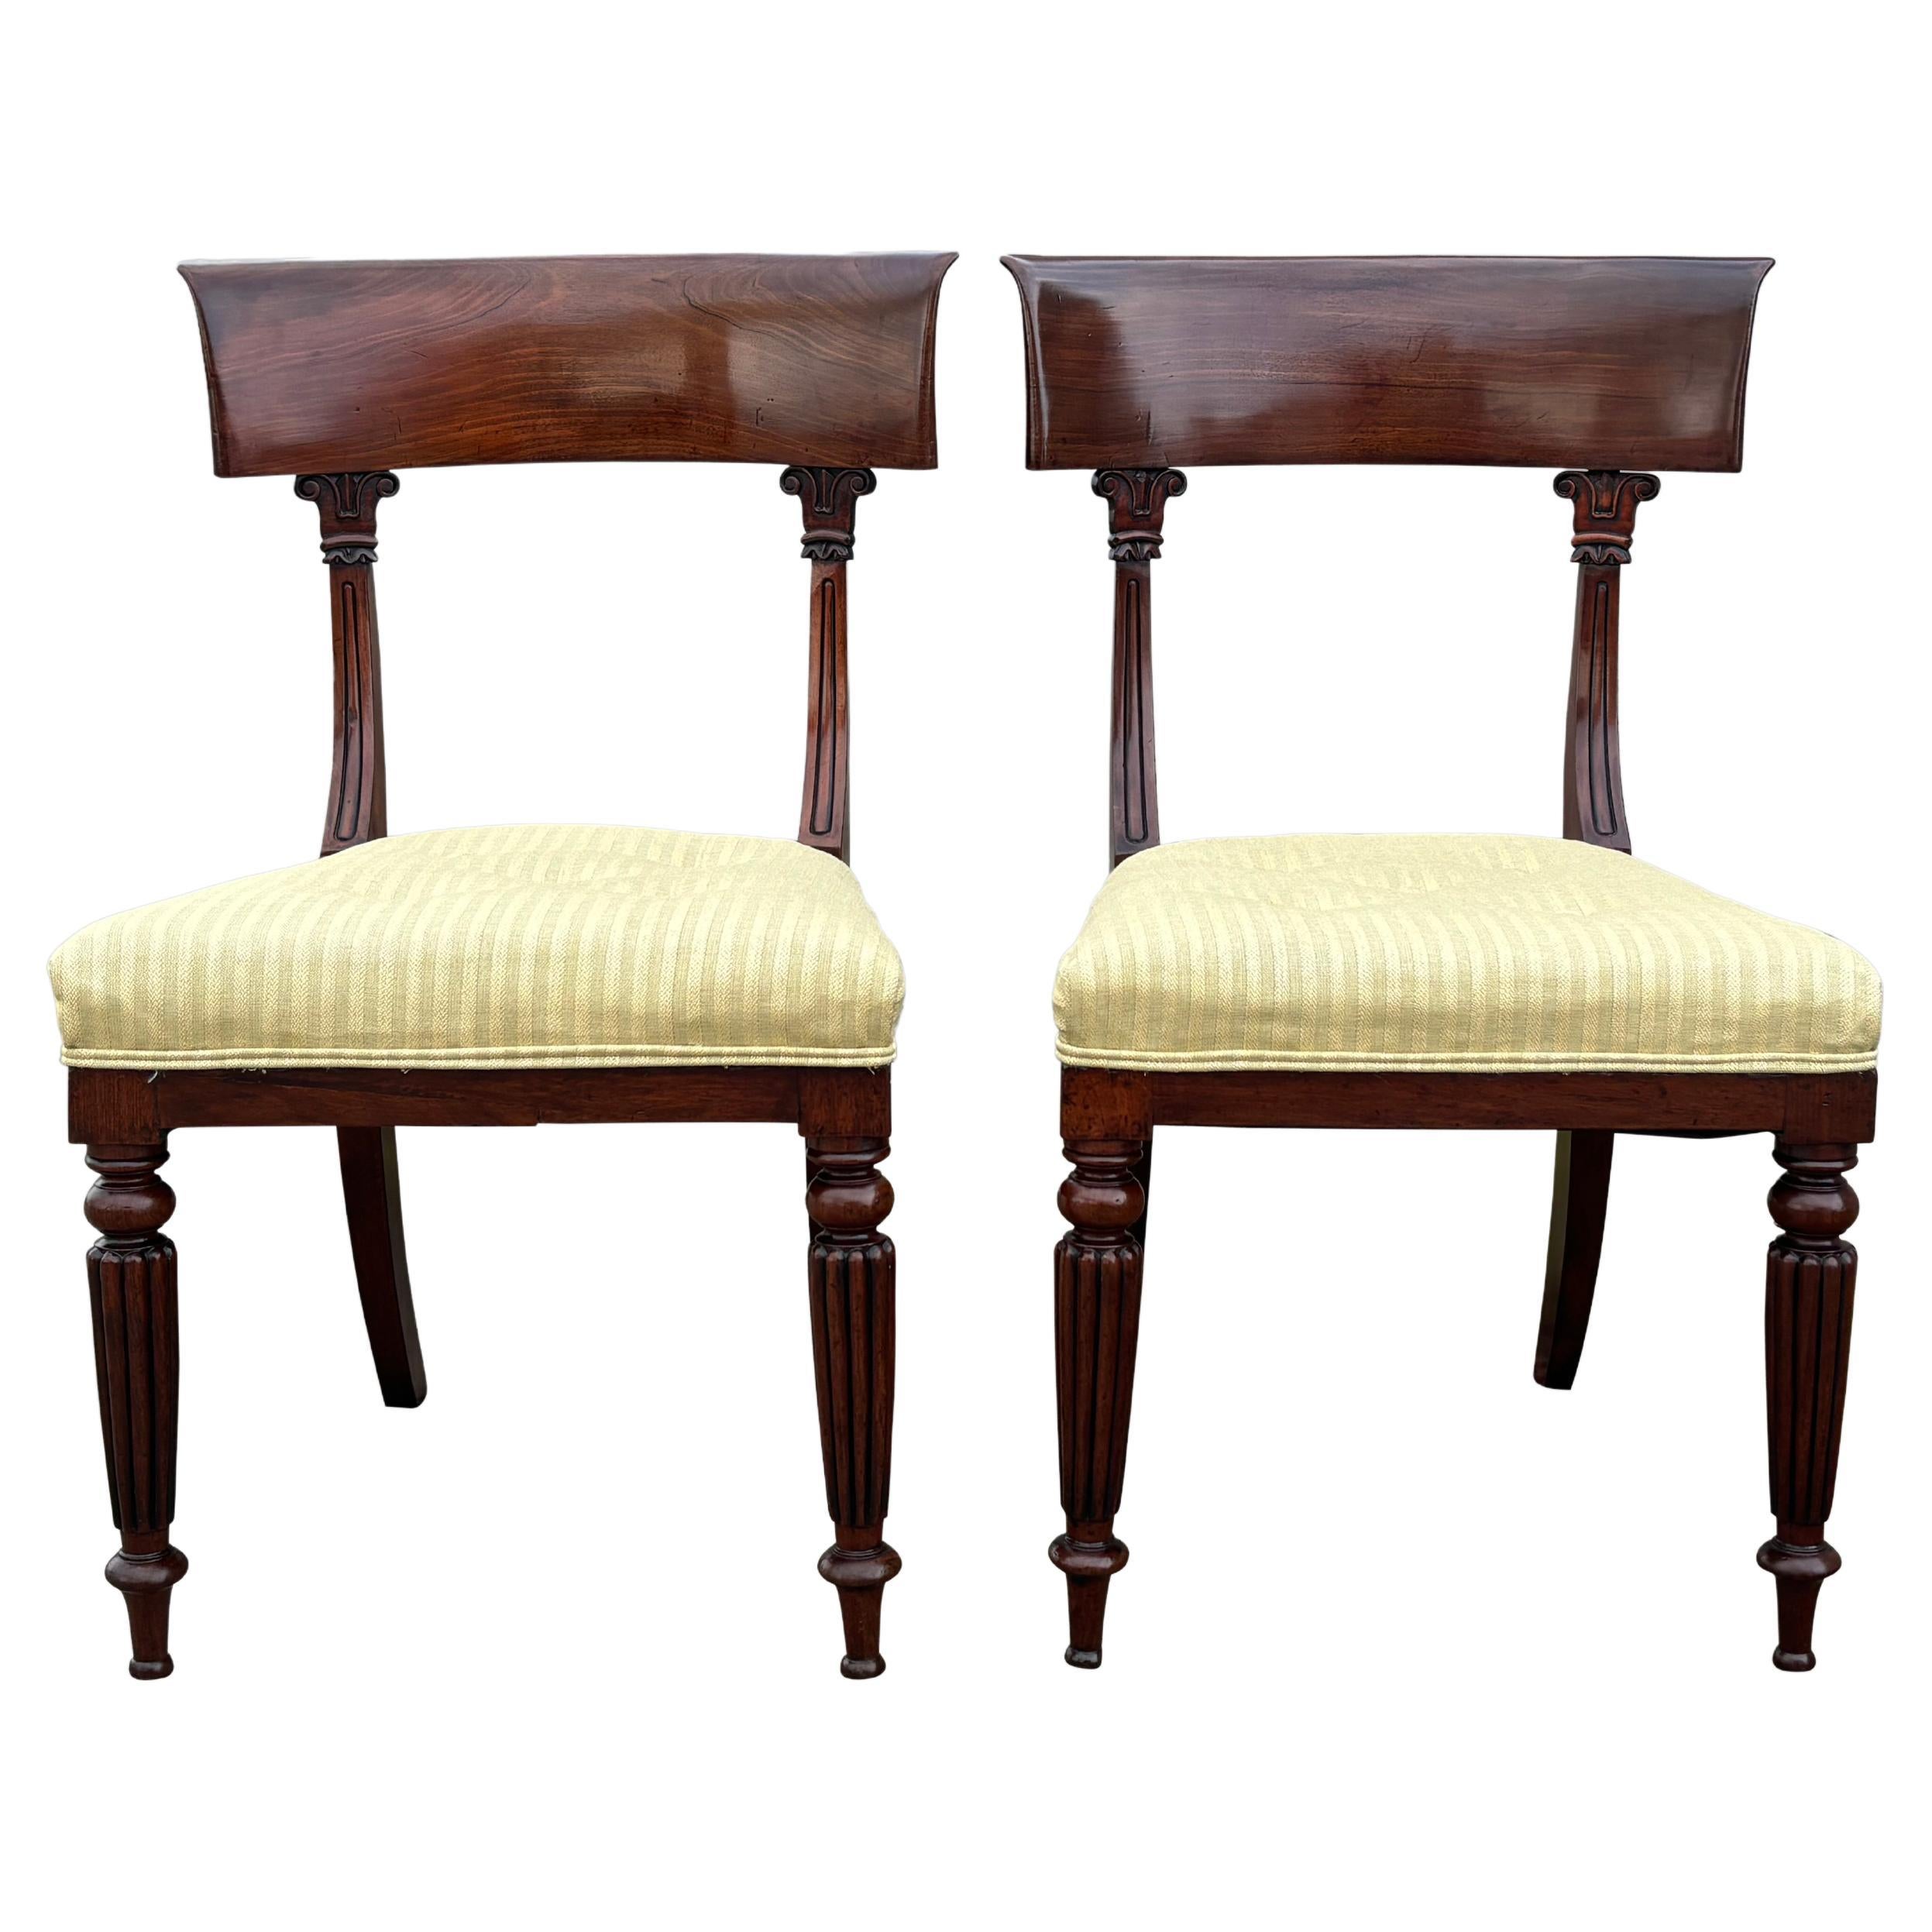 Pair of 19th Century William IV Period Mahogany Side Chairs For Sale